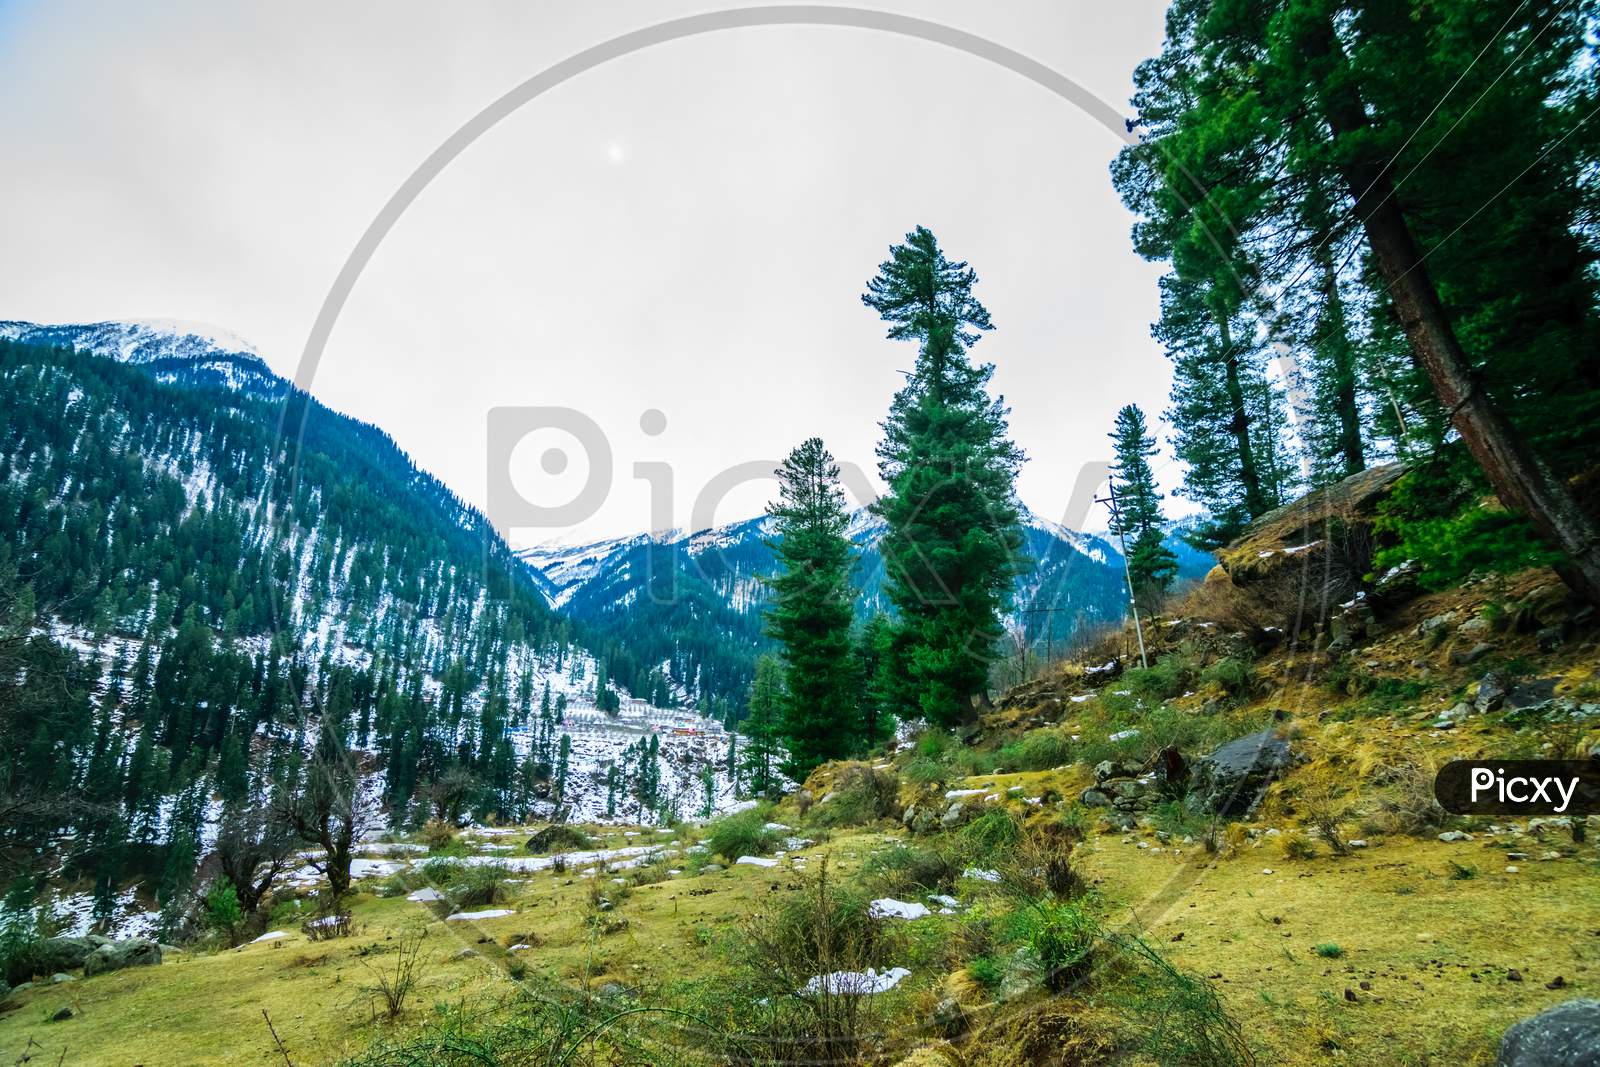 A Green Valley In The Lap Of The Mountain With Tall Deodar Trees And Snow Capped Mountain In The Background